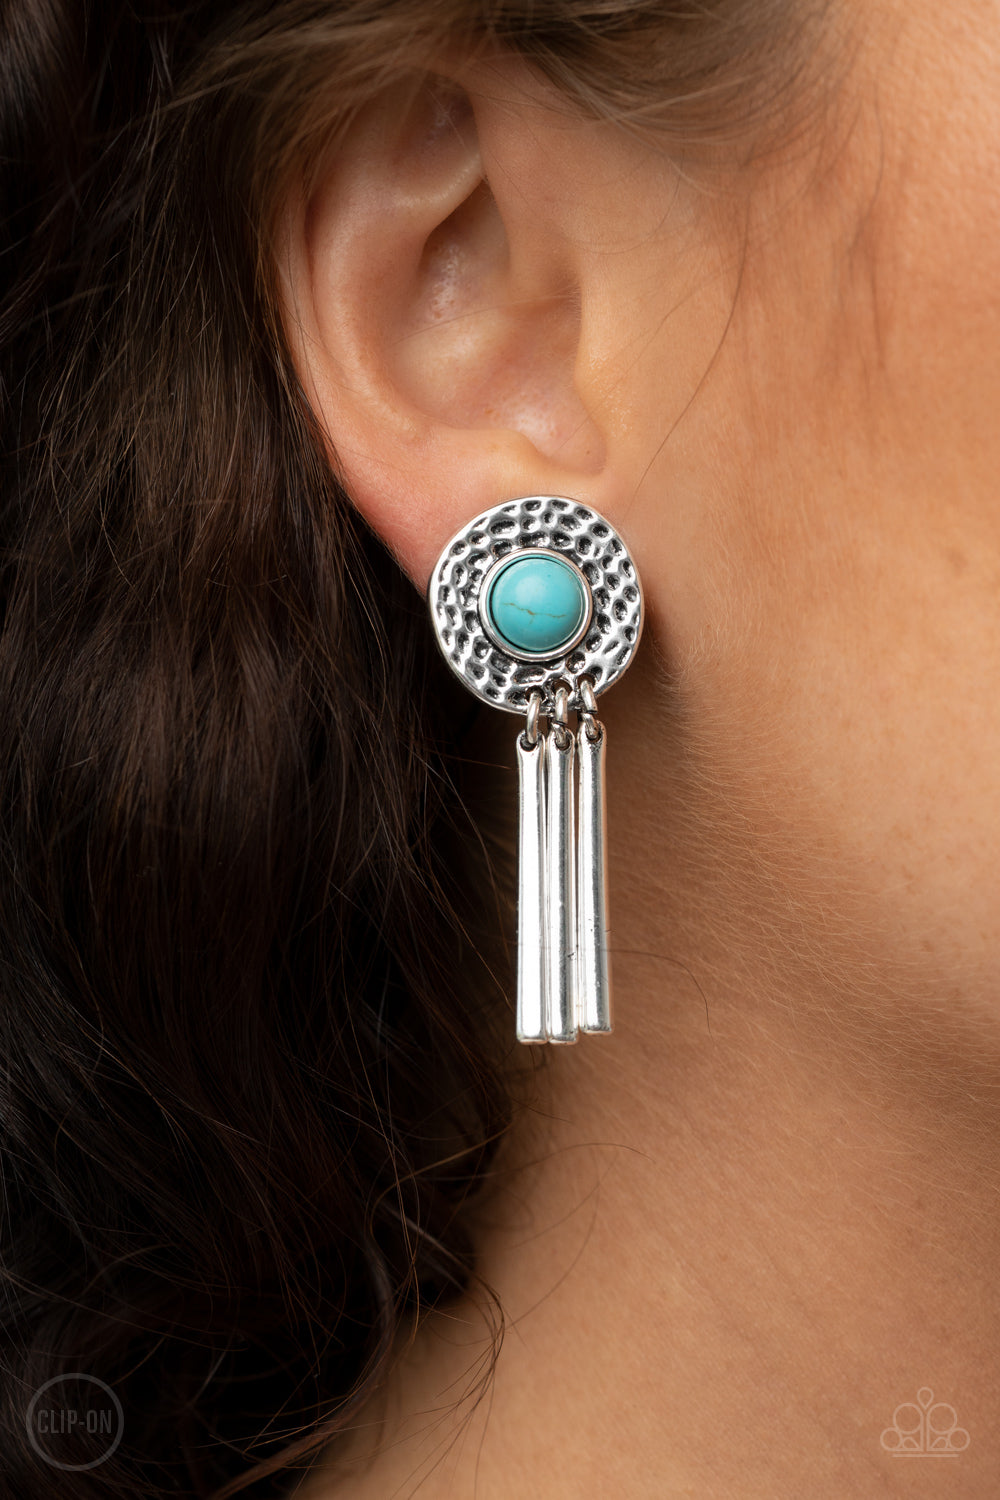 Paparazzi Desert Amulet - Blue Turquoise Stone - Hammered Silver Clip On Earrings - $5 Jewelry with Ashley Swint